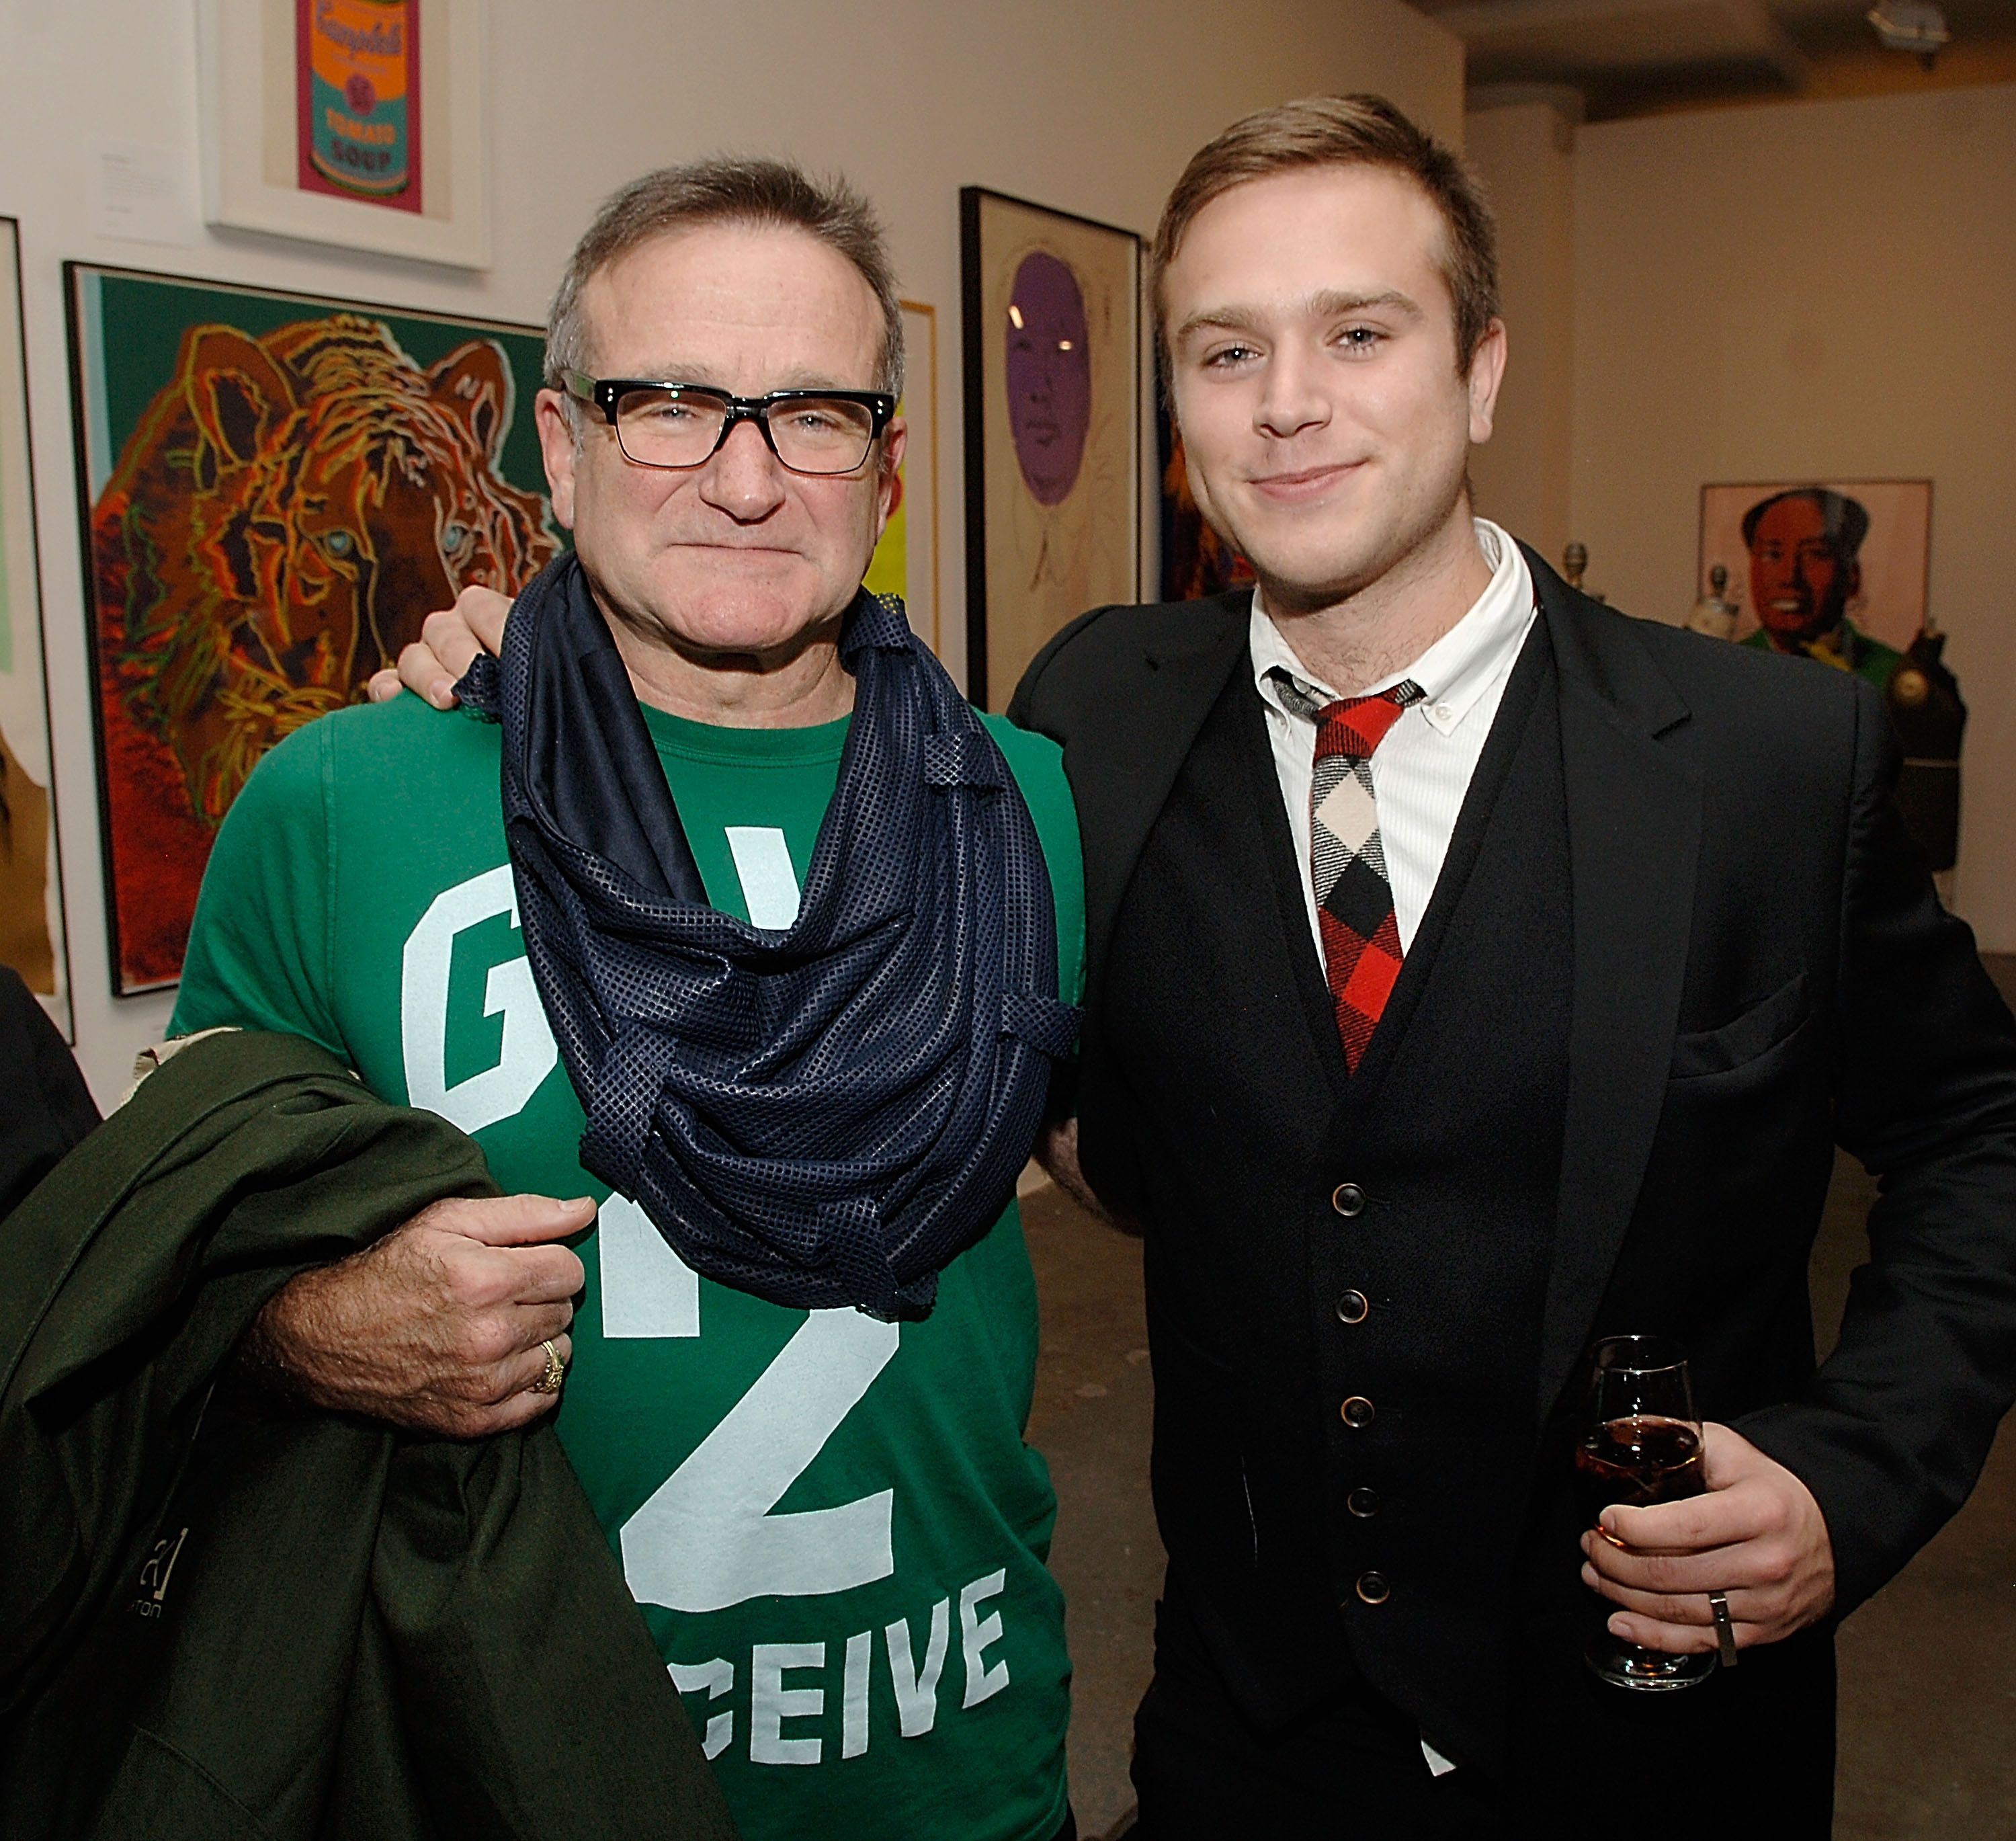 Robin Williams and Zak Williams attend the Timo Pre Fall 2009 Launch with Interview Magazine at Phillips De Pury on November 18, 2008 in New York City. | Photo: Getty Images